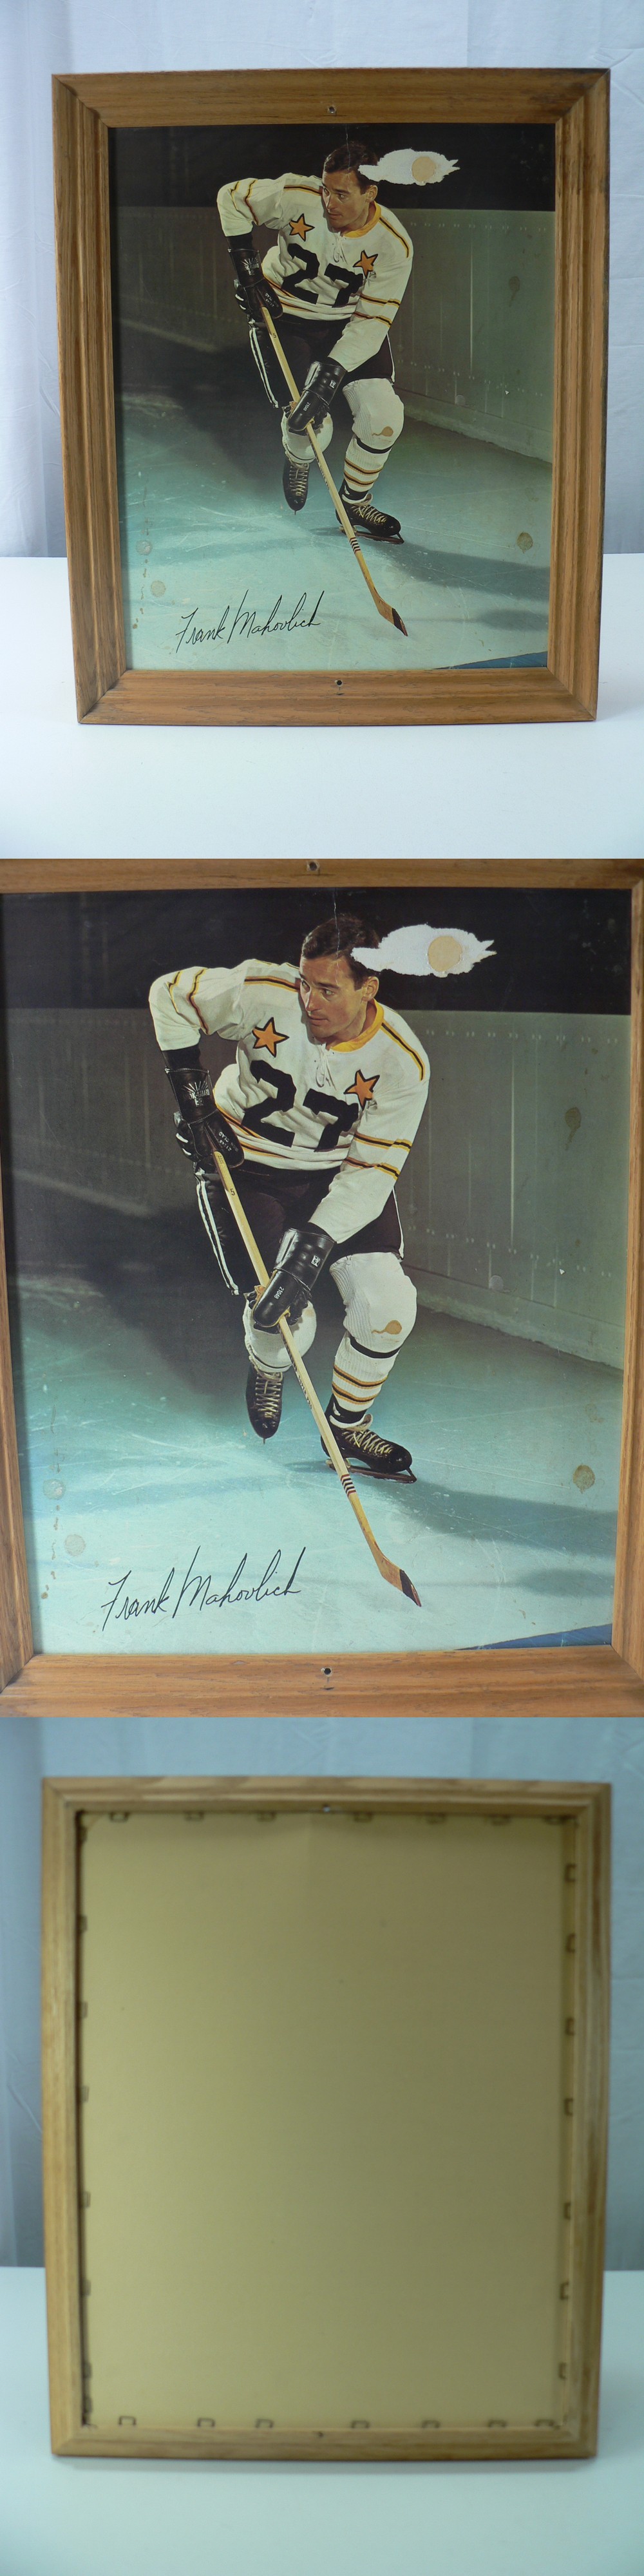 1966-67 GENERAL MILLS STORE DISPLAY PICTURE F. MAHOVLICH photo